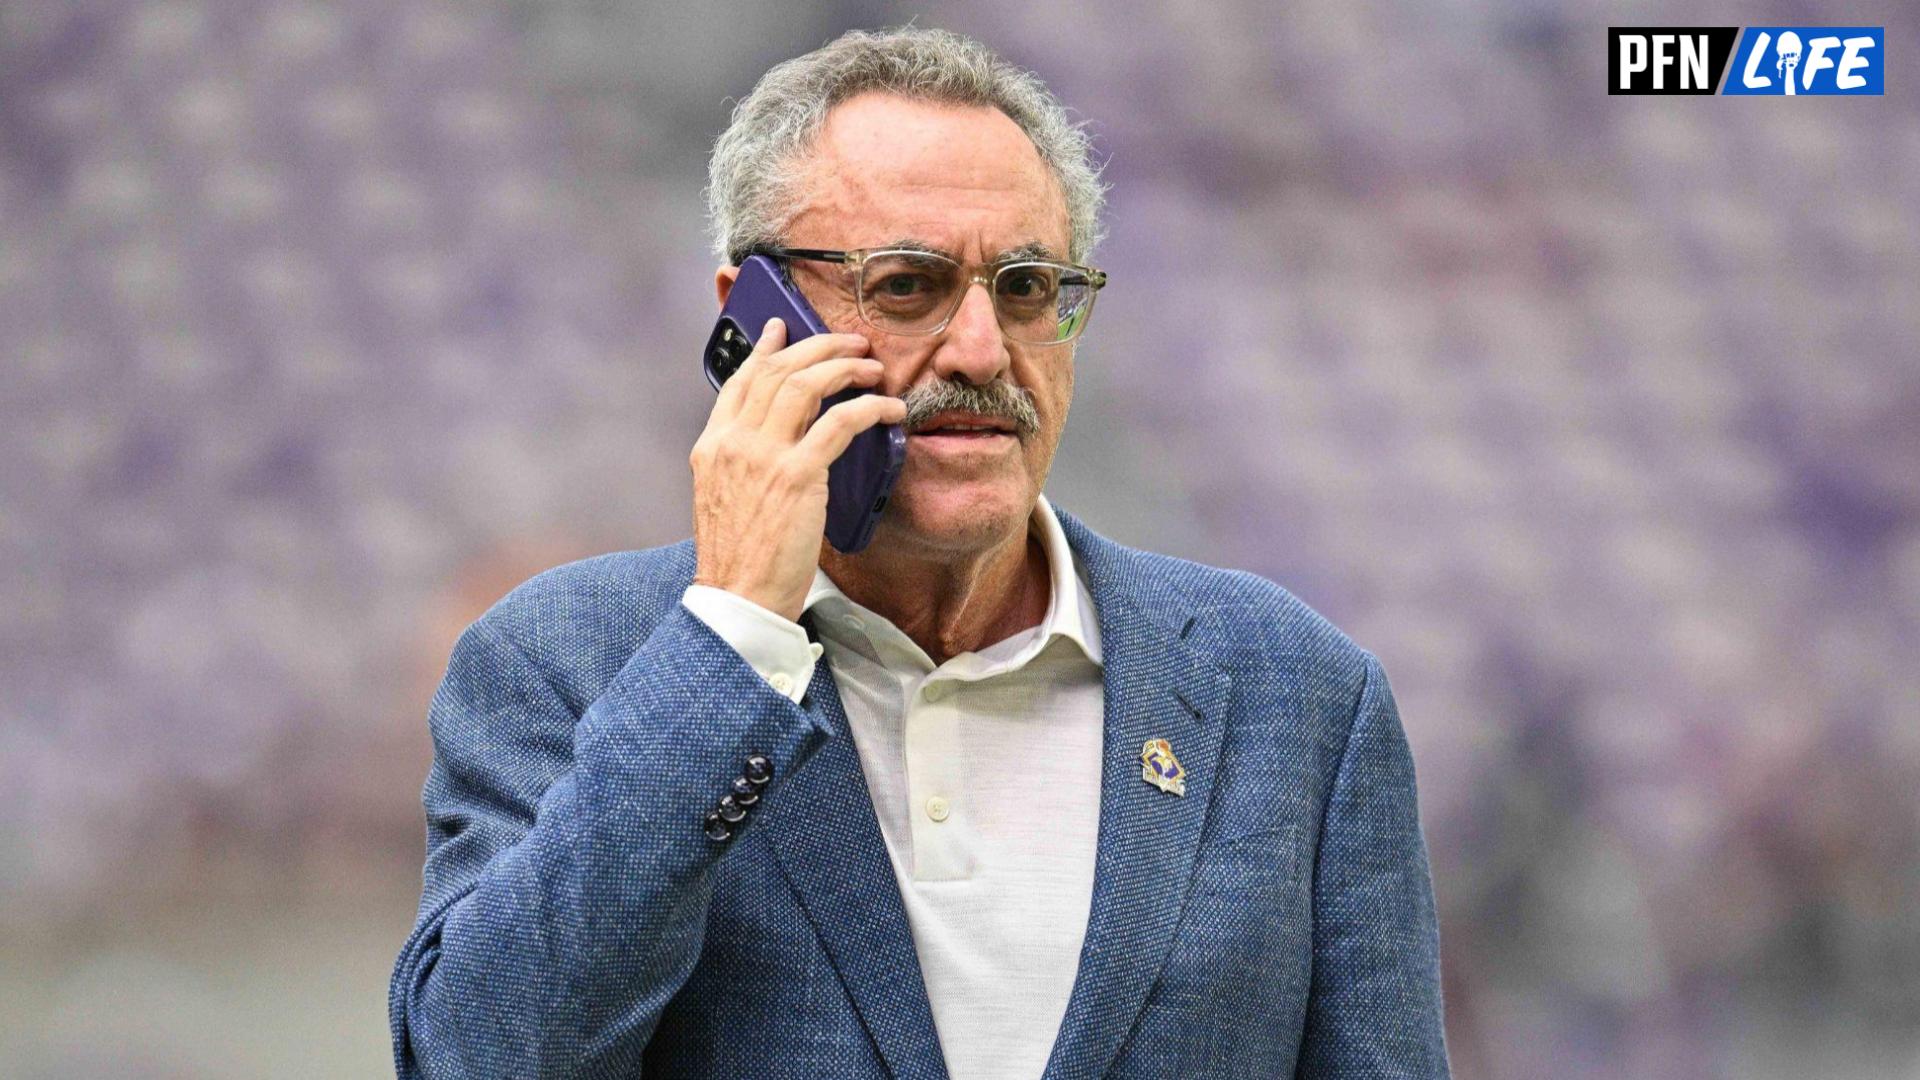 Minnesota Vikings chairman and co-owner Zygi Wilf walks along the sidelines before the game against the Tampa Bay Buccaneers at U.S. Bank Stadium.